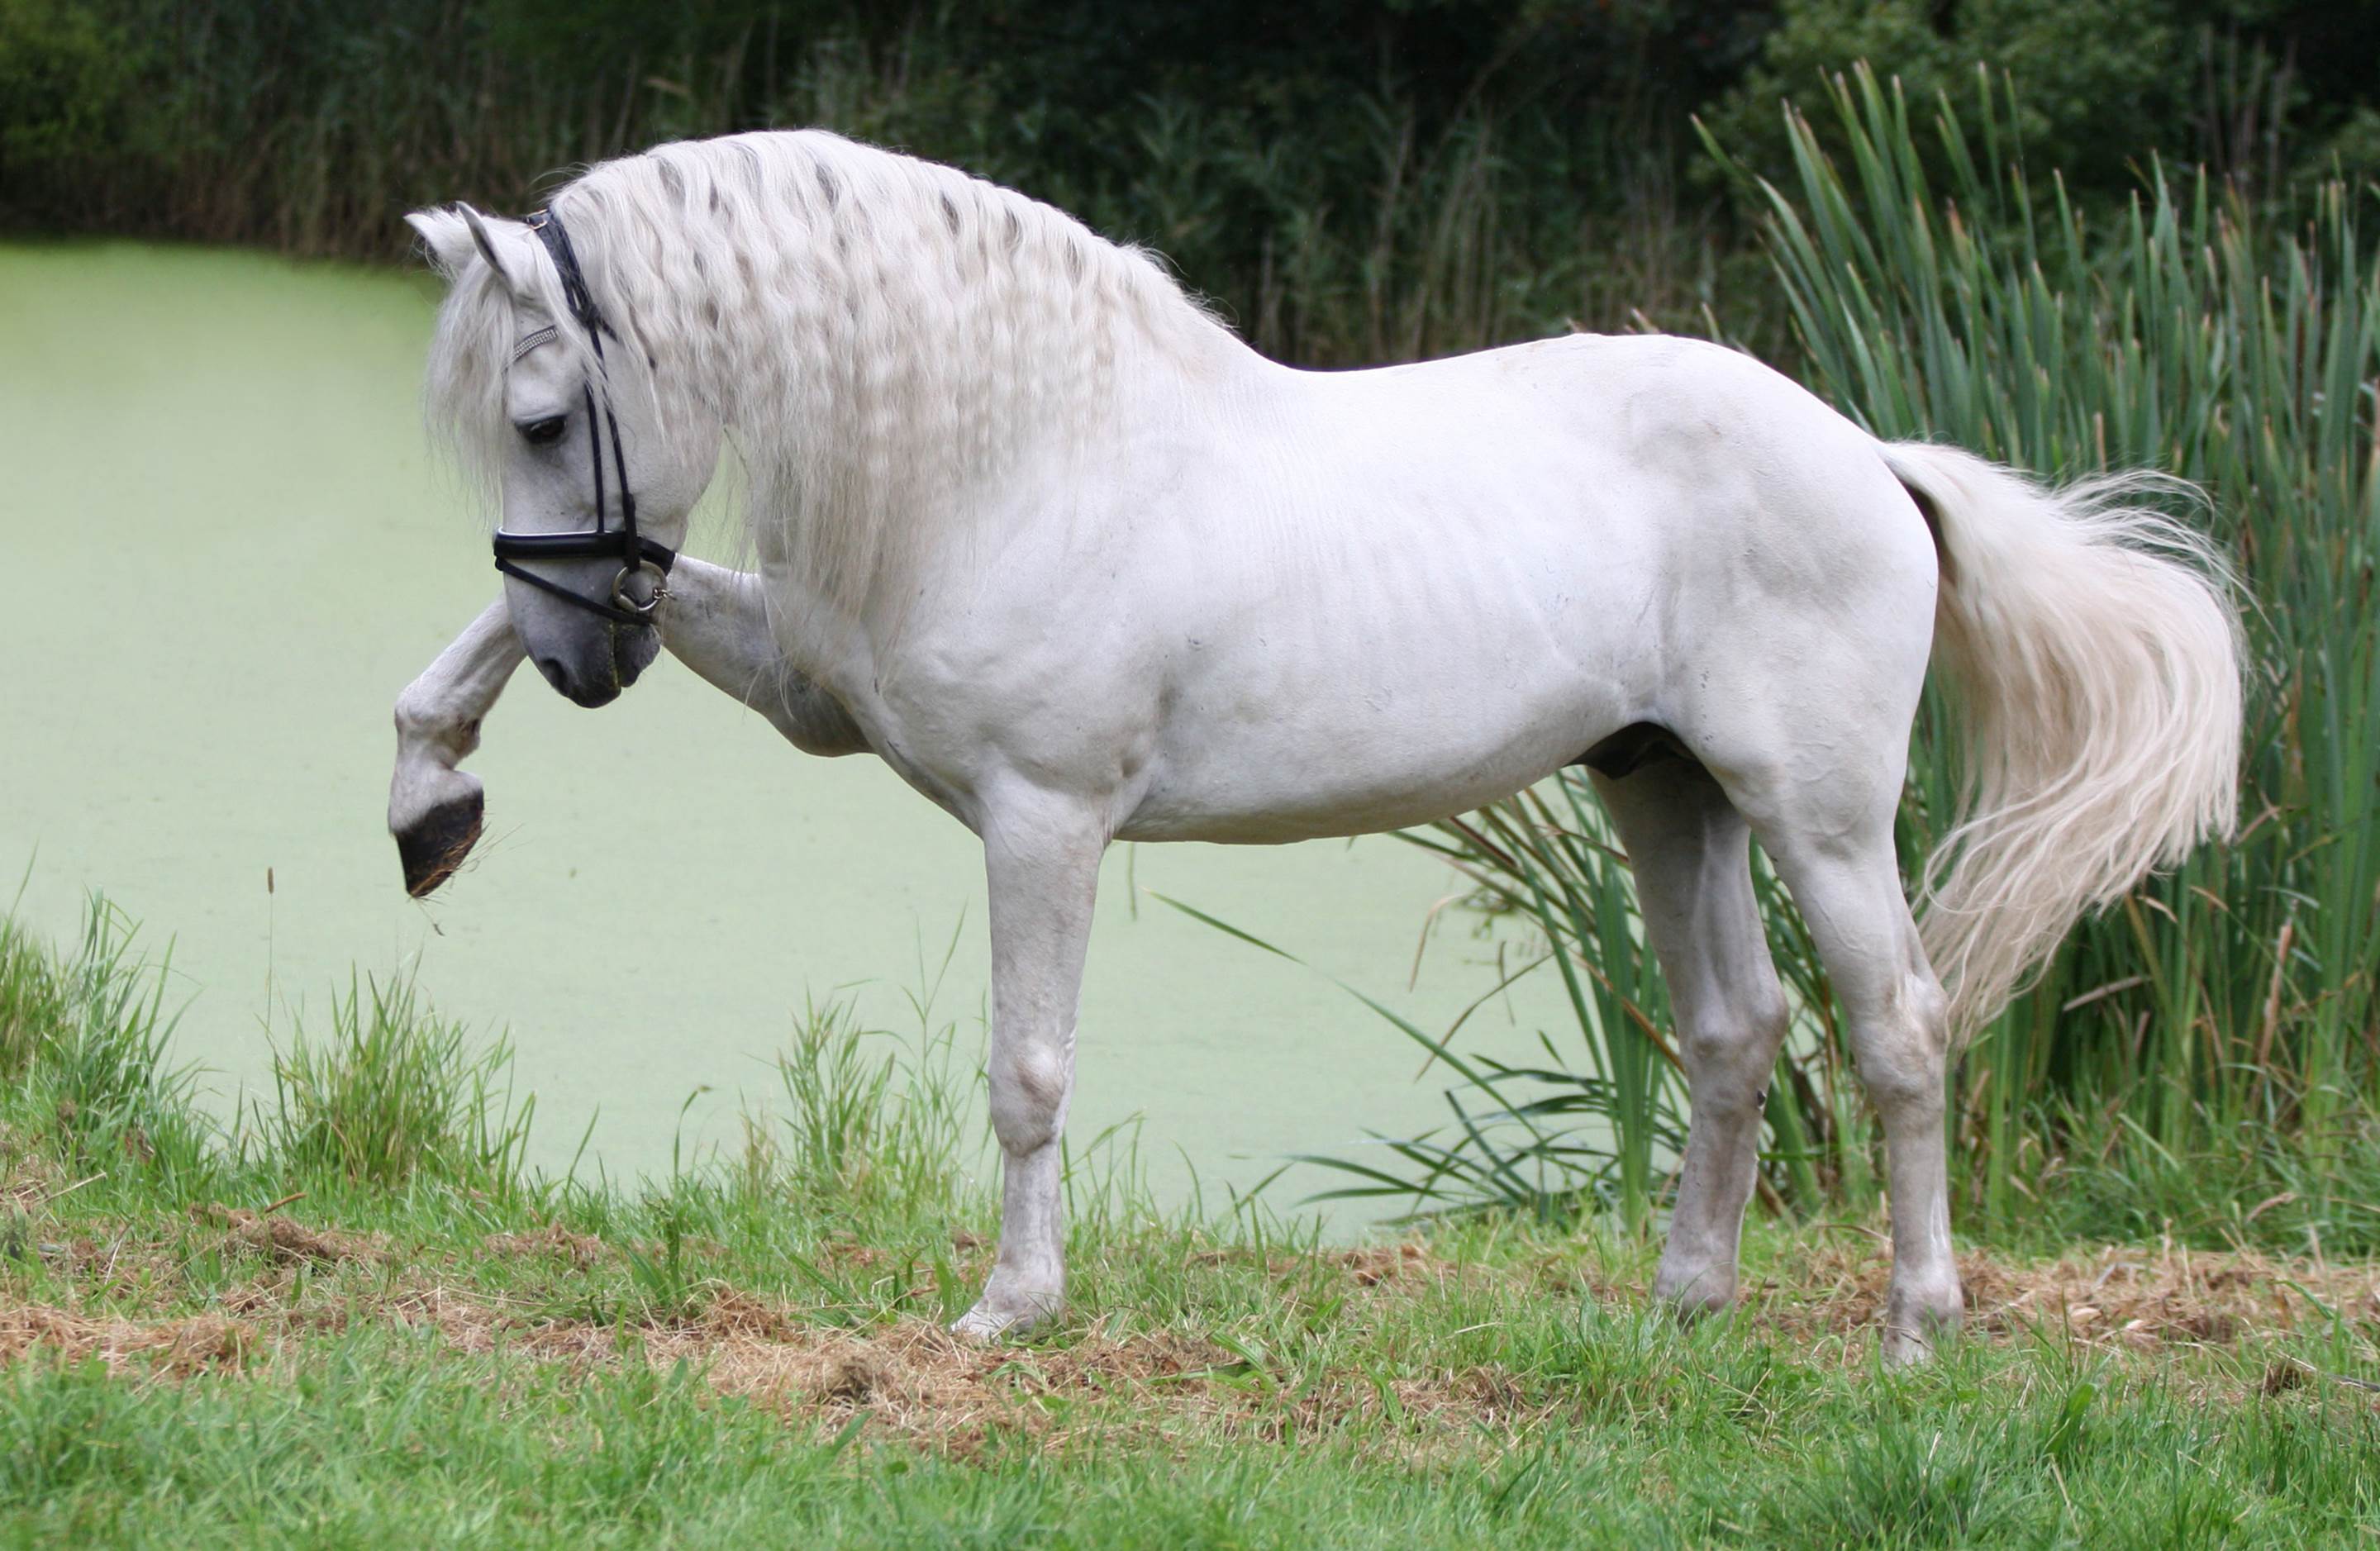 Magnificent White Andalusian Horse Wallpaper wallpaperspickcom